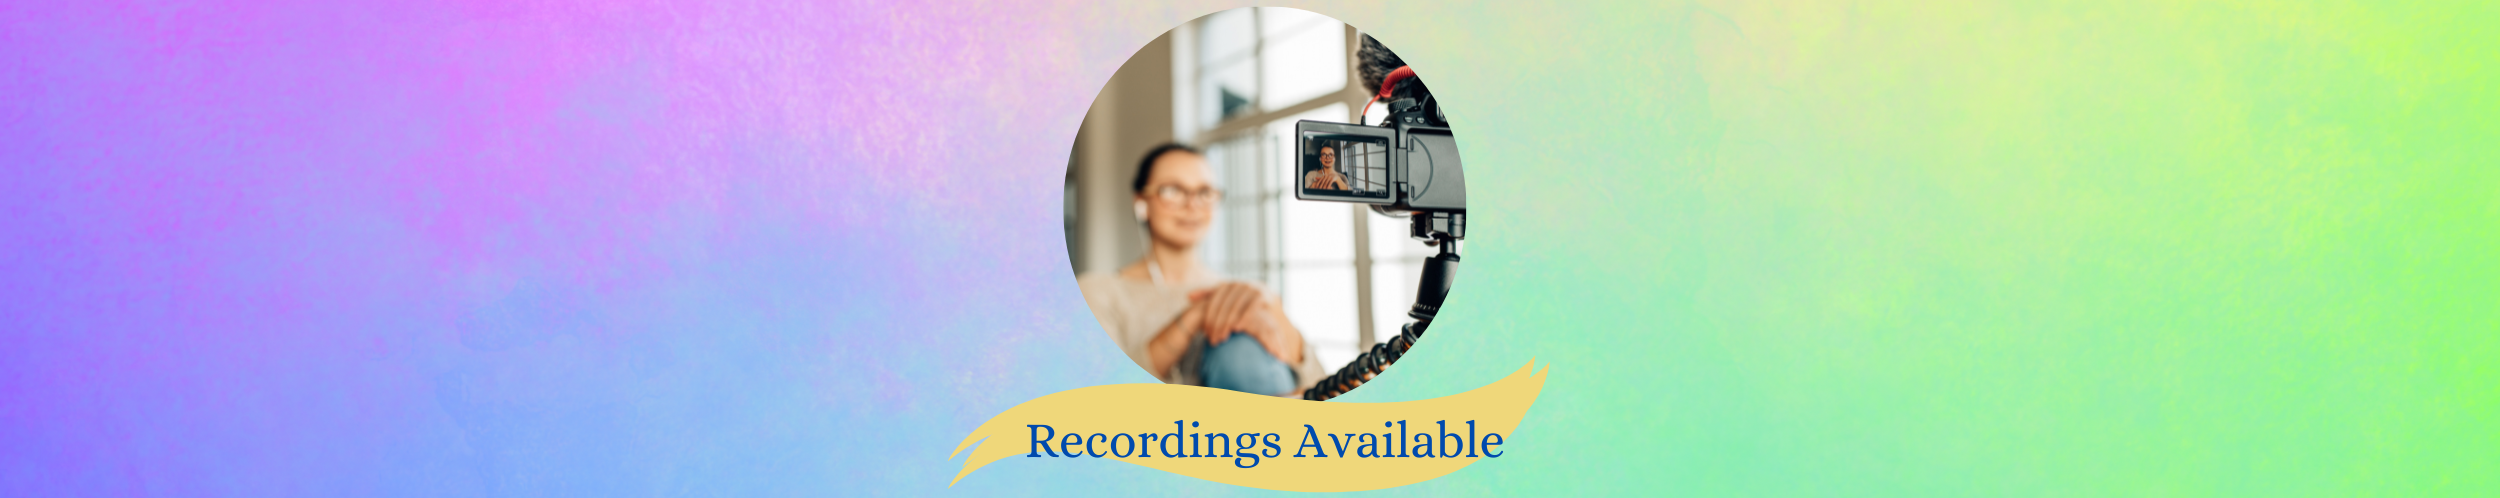 recordings available